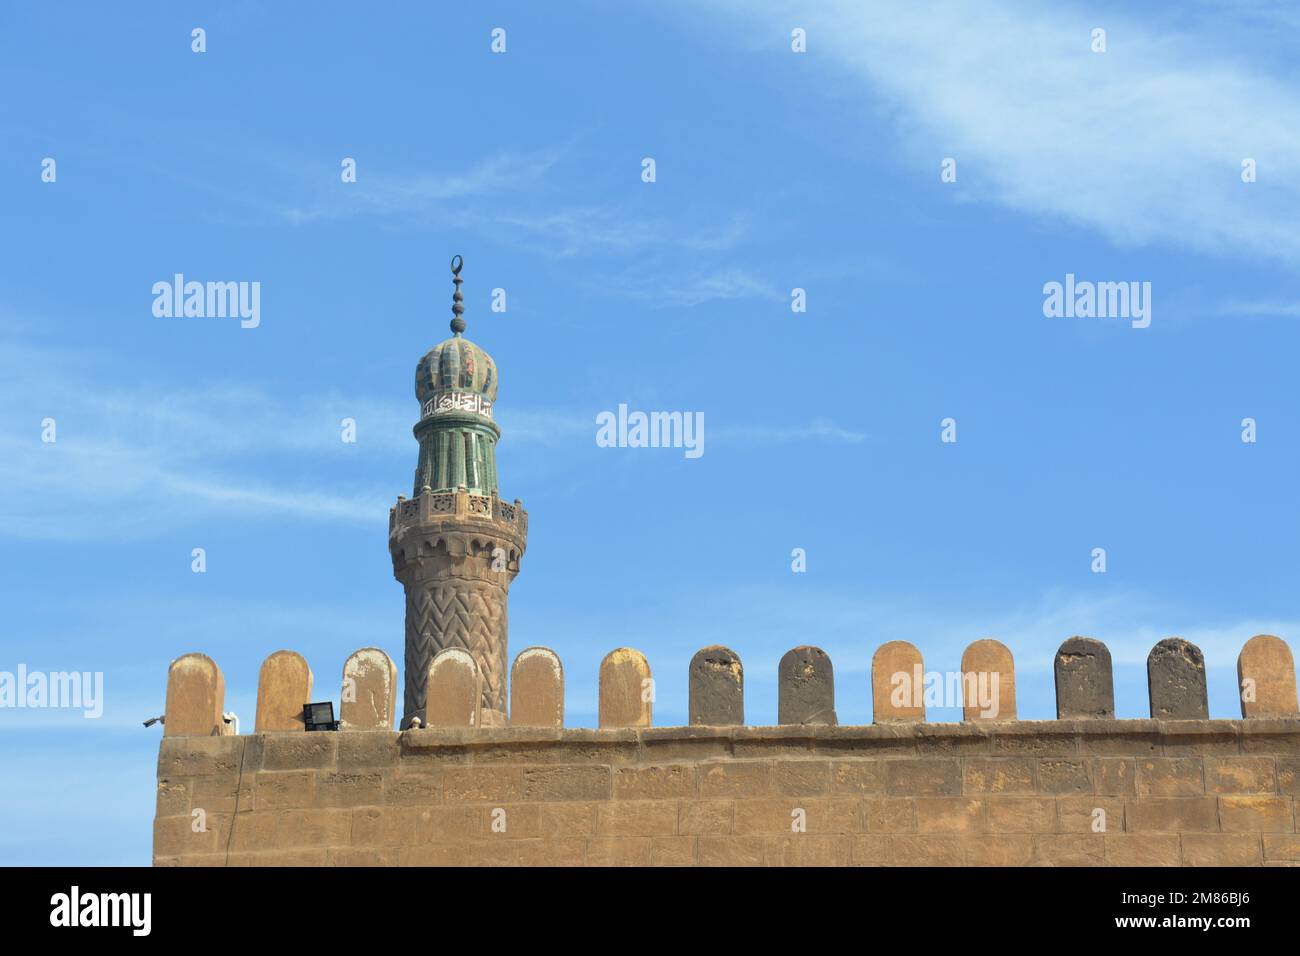 The Sultan Al-Nasir Muhammad ibn Qalawun Mosque, an early 14th-century mosque at the Citadel in Cairo, Egypt built by the Mamluk sultan Al-Nasr Muhamm Stock Photo